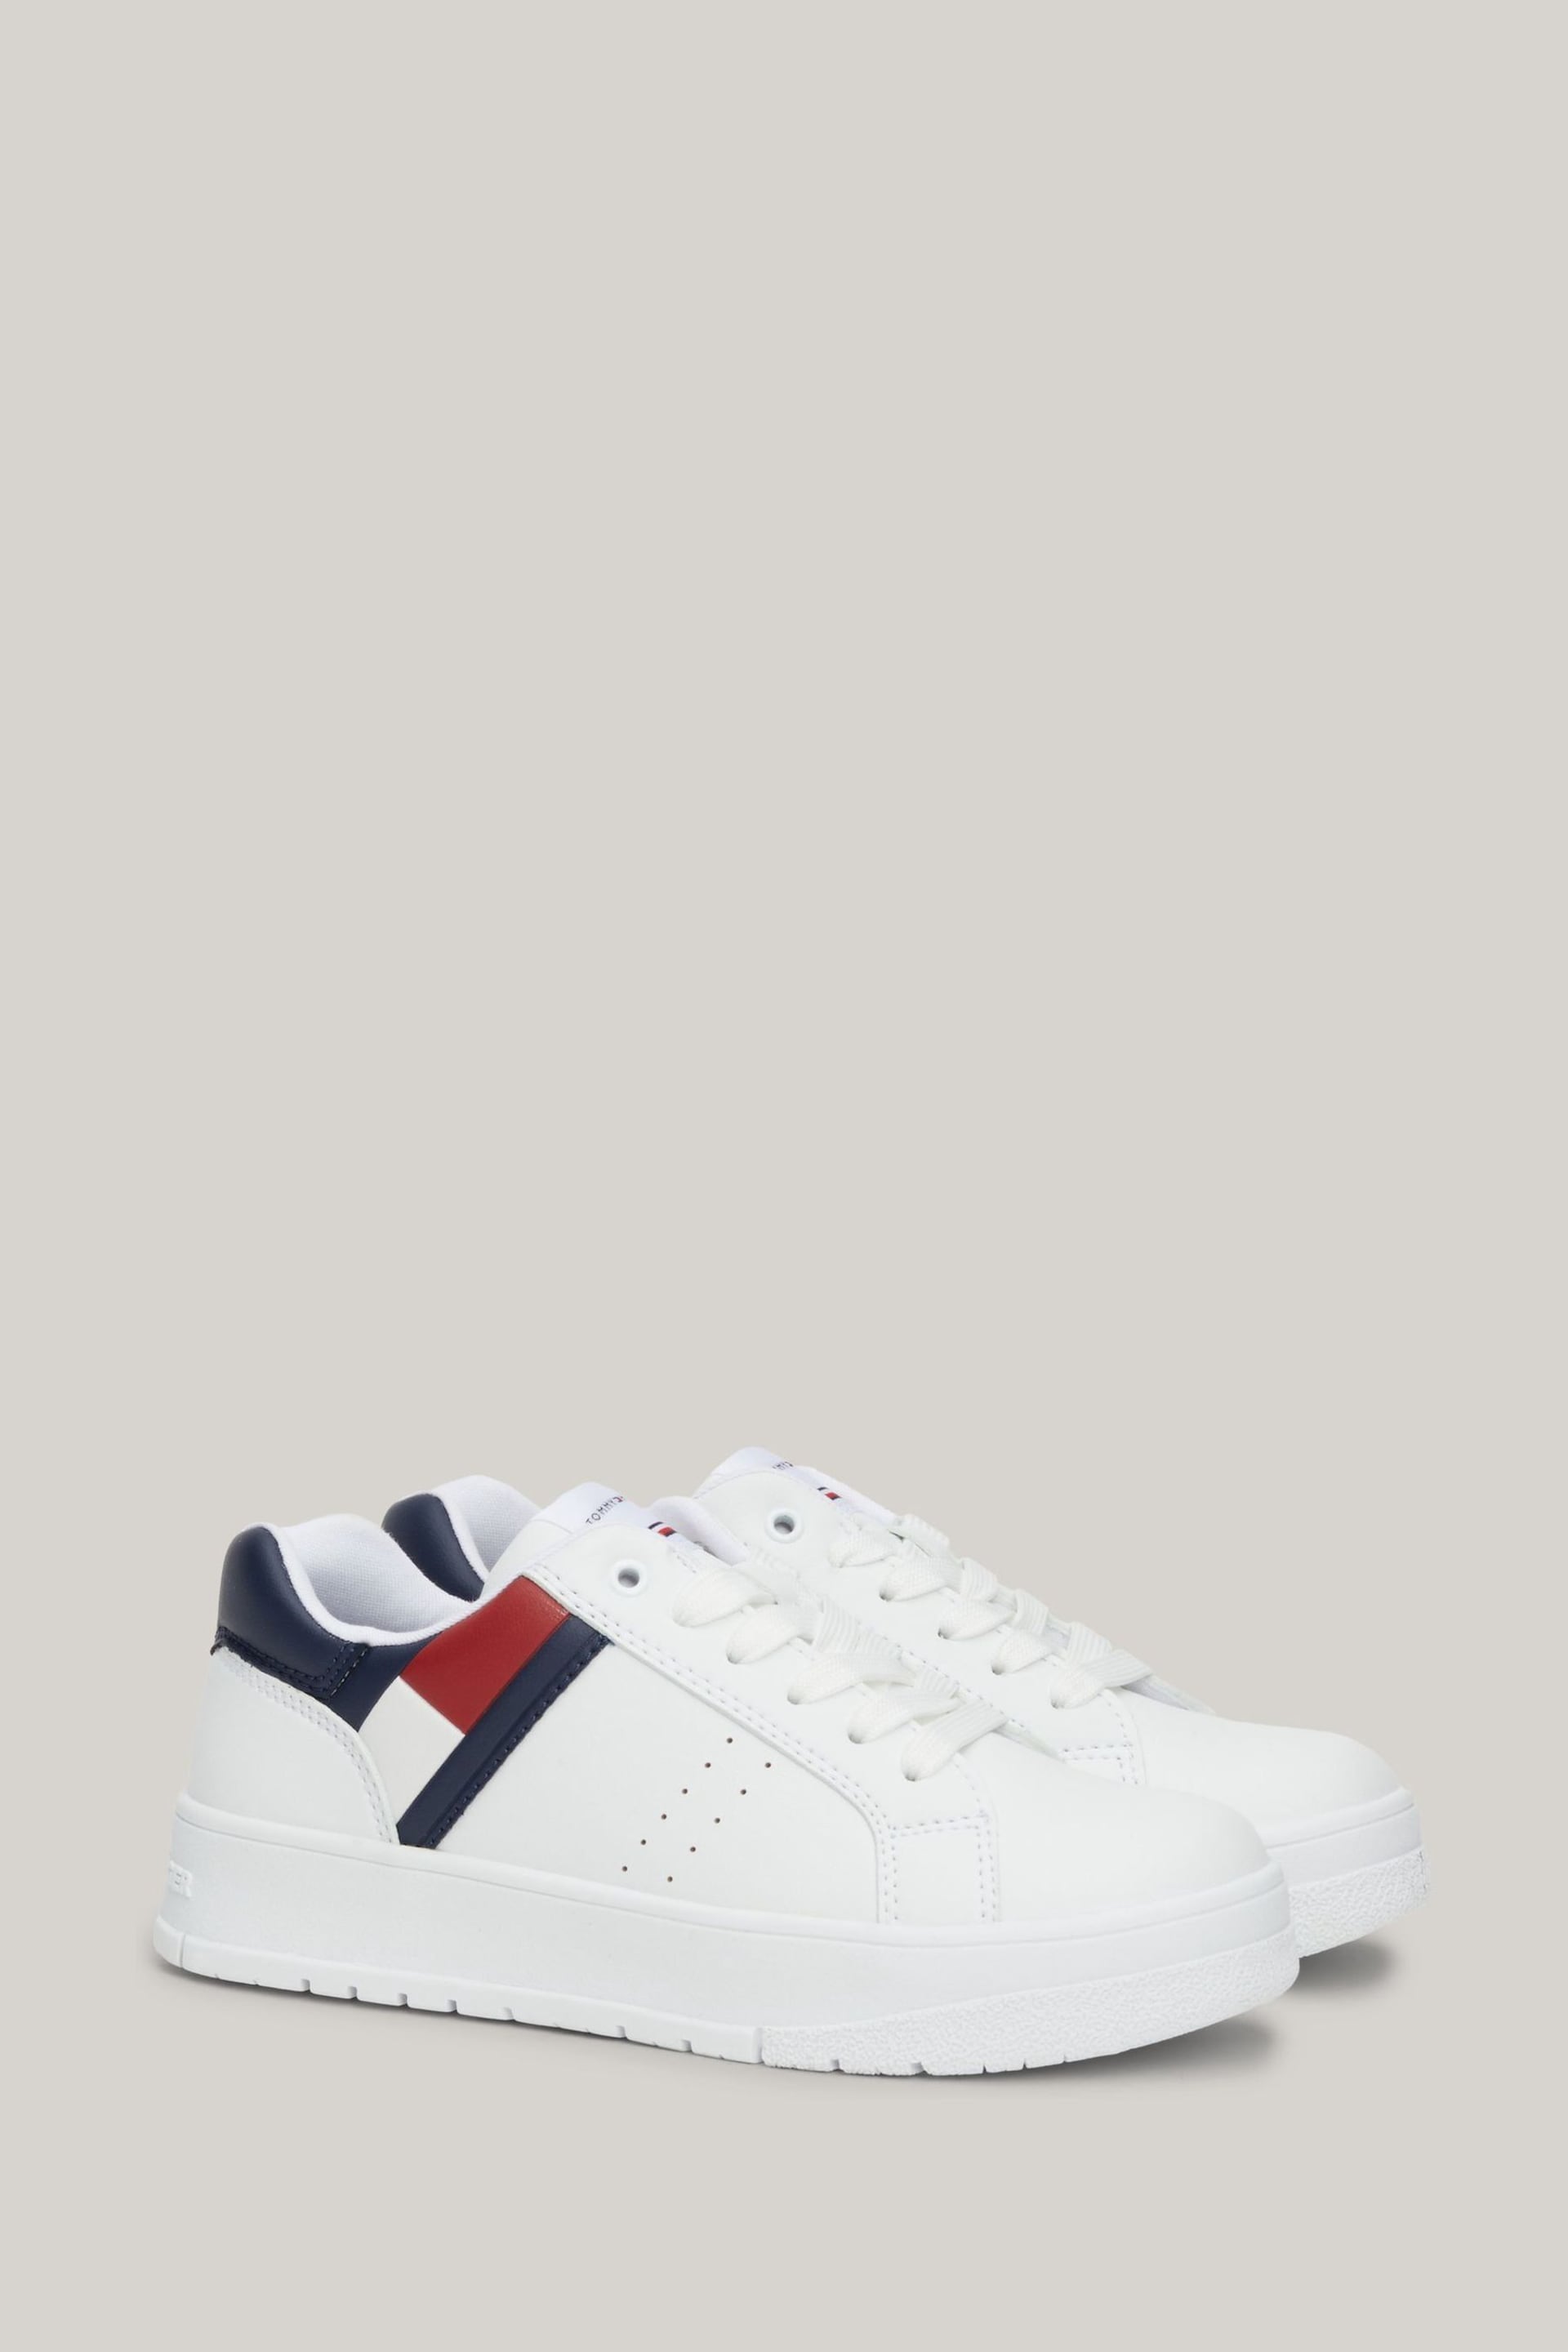 Tommy Hilfiger Flag Low Cut Lace-up White Sneakers - Image 1 of 5